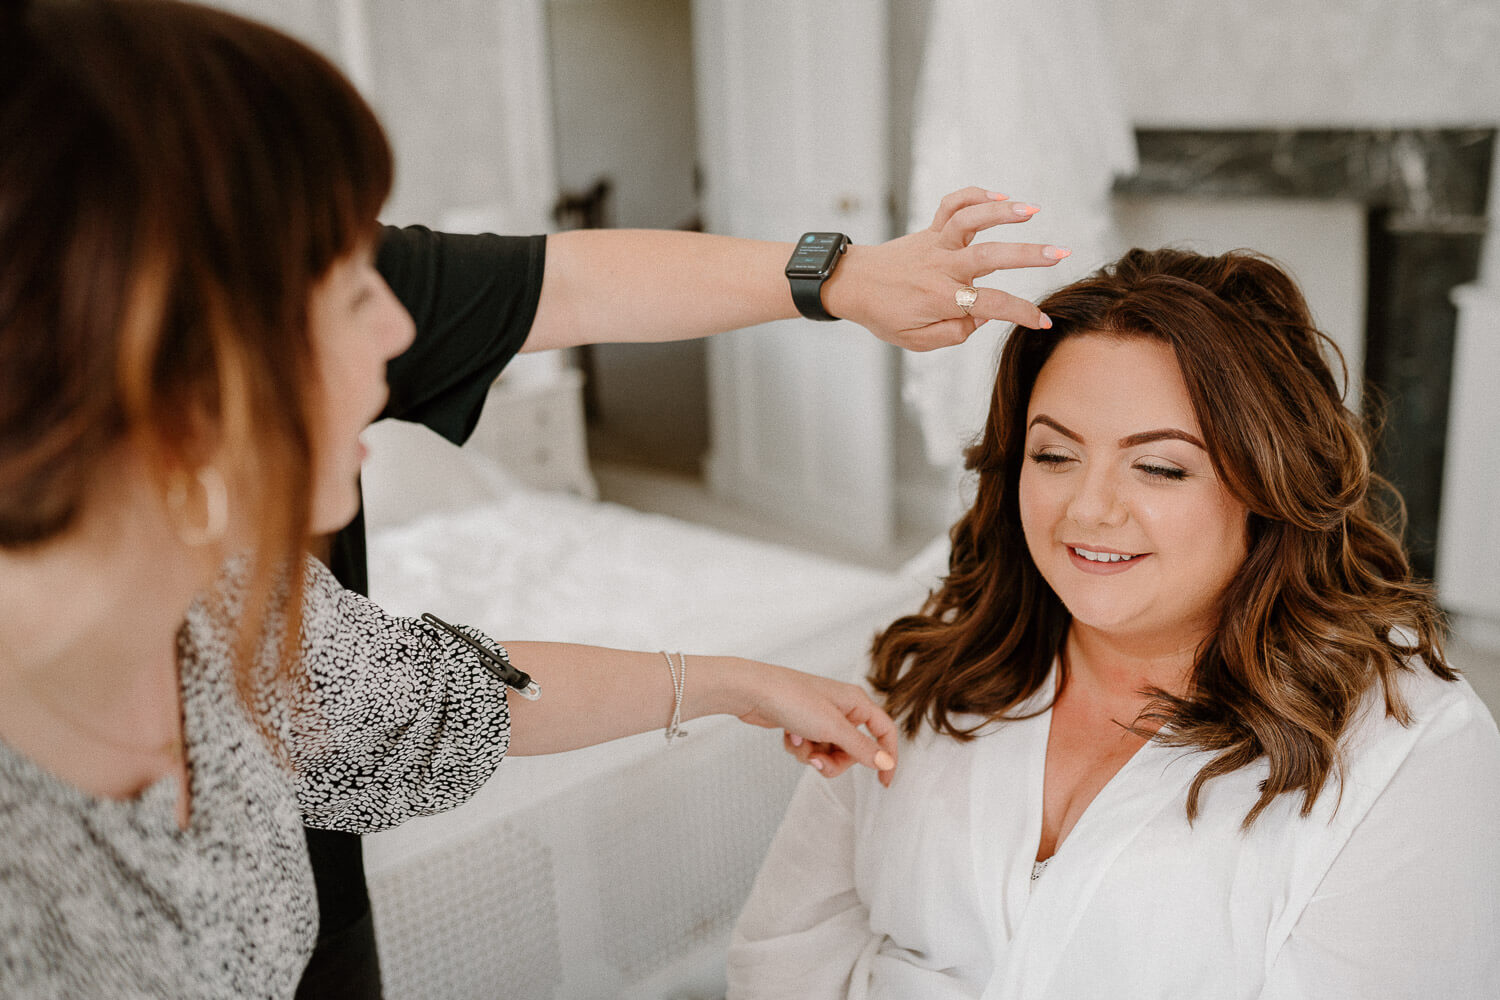 Makeup artist and hair stylist assist bride in preparing for her wedding day.